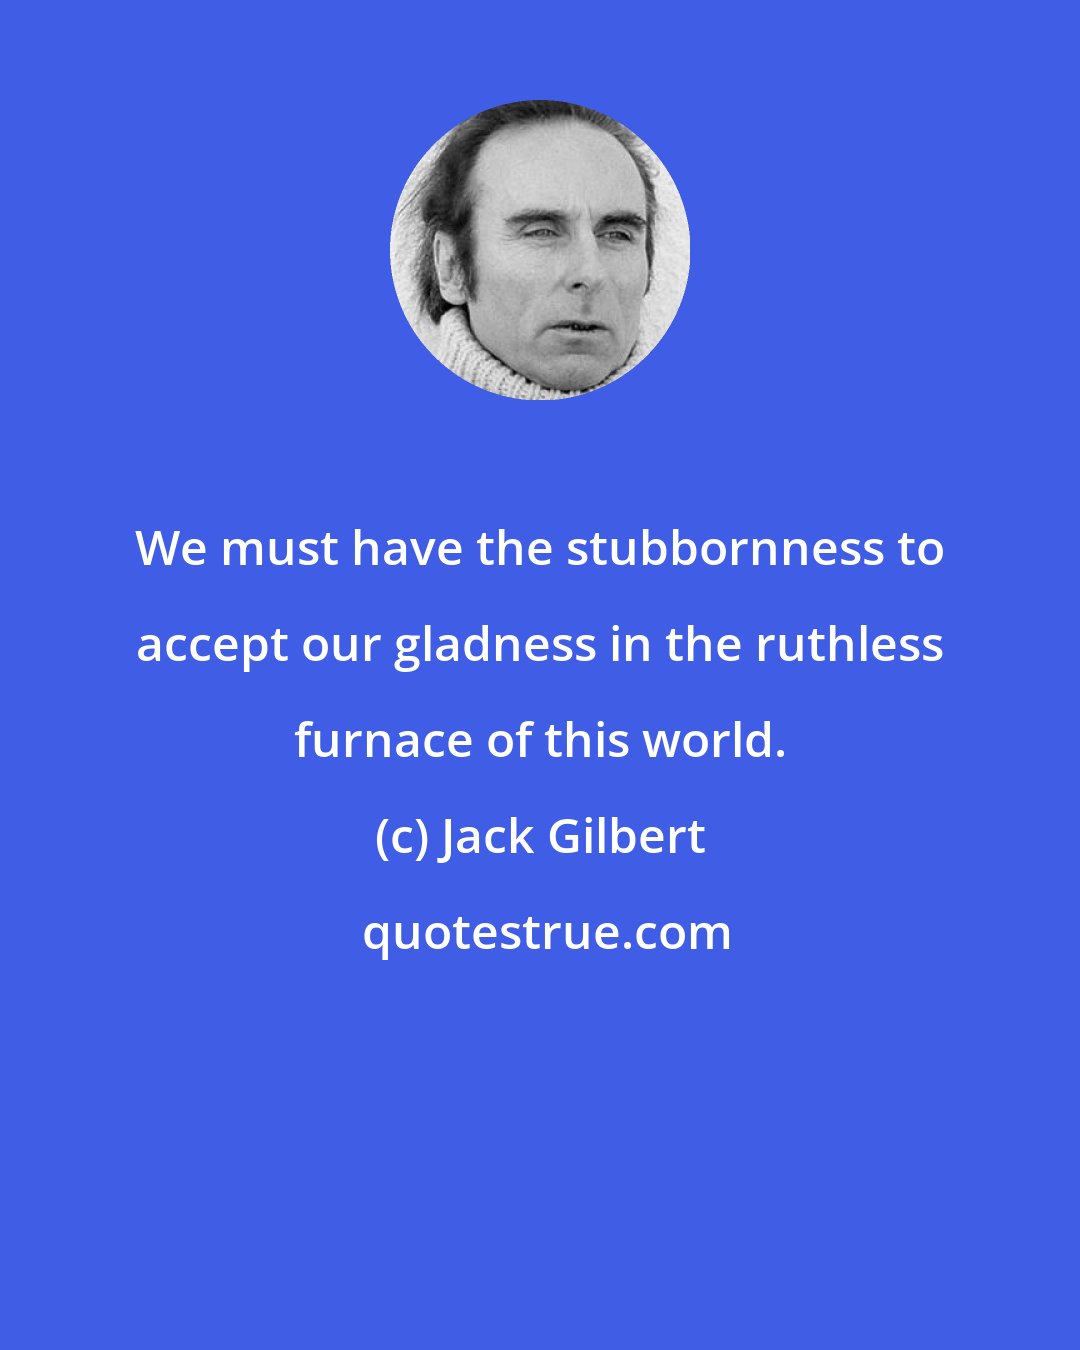 Jack Gilbert: We must have the stubbornness to accept our gladness in the ruthless furnace of this world.